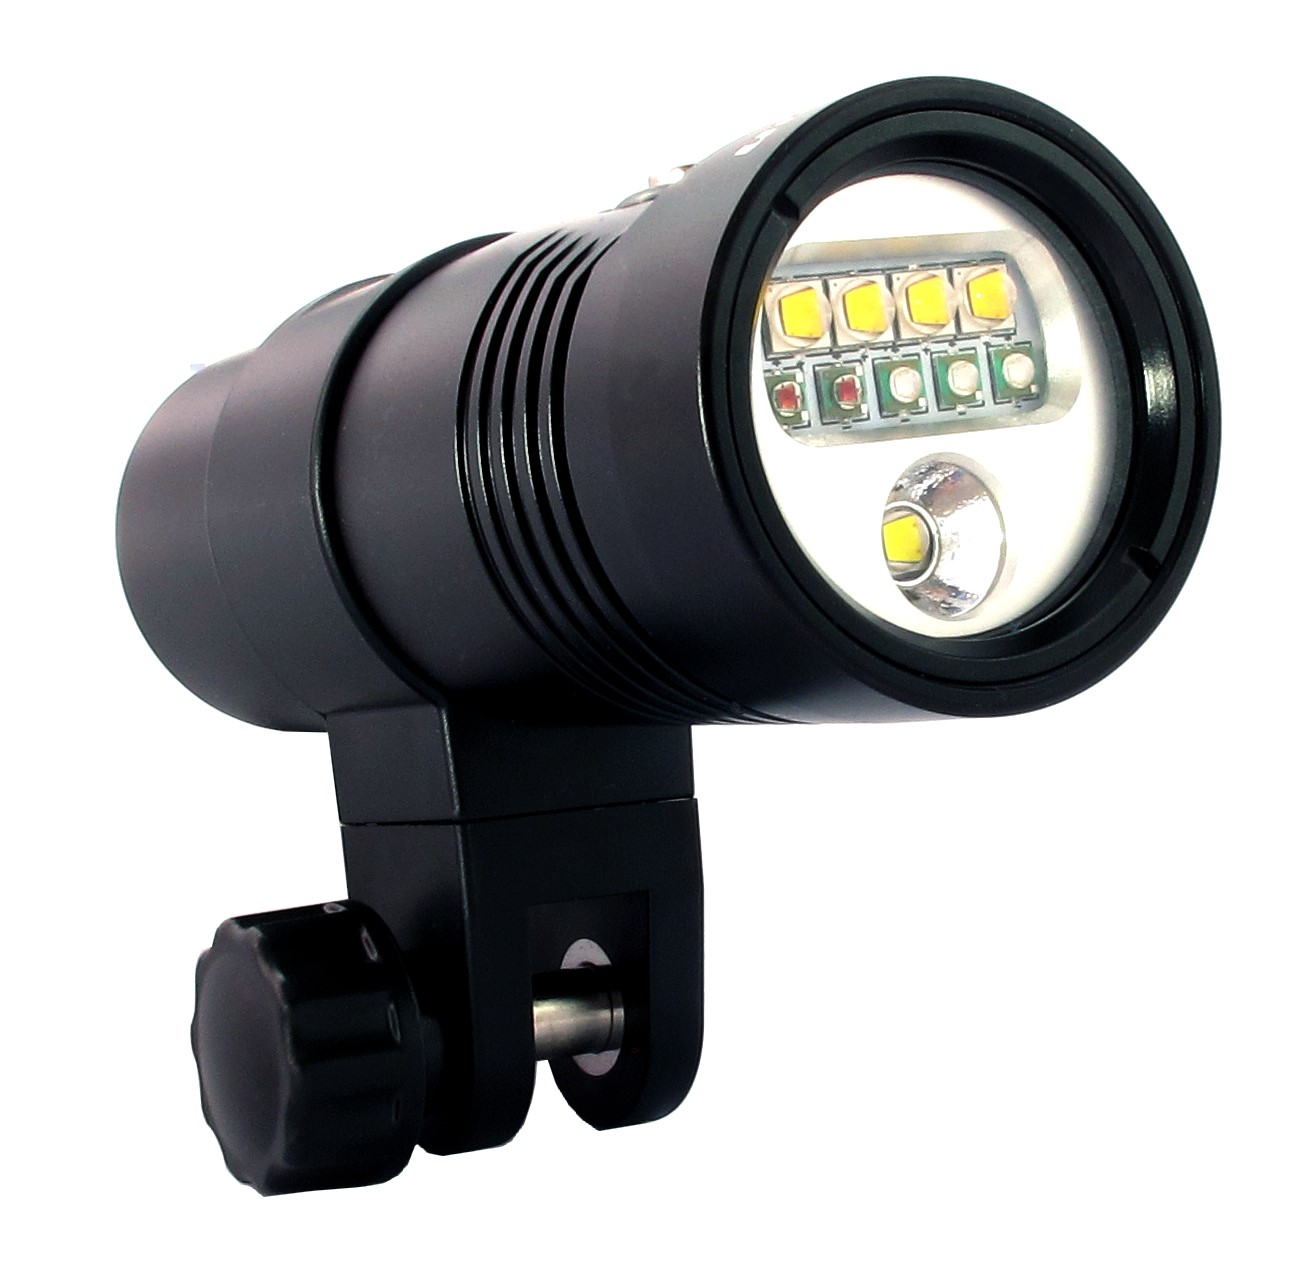 LED Tauchlampe DS-2100NWRUV